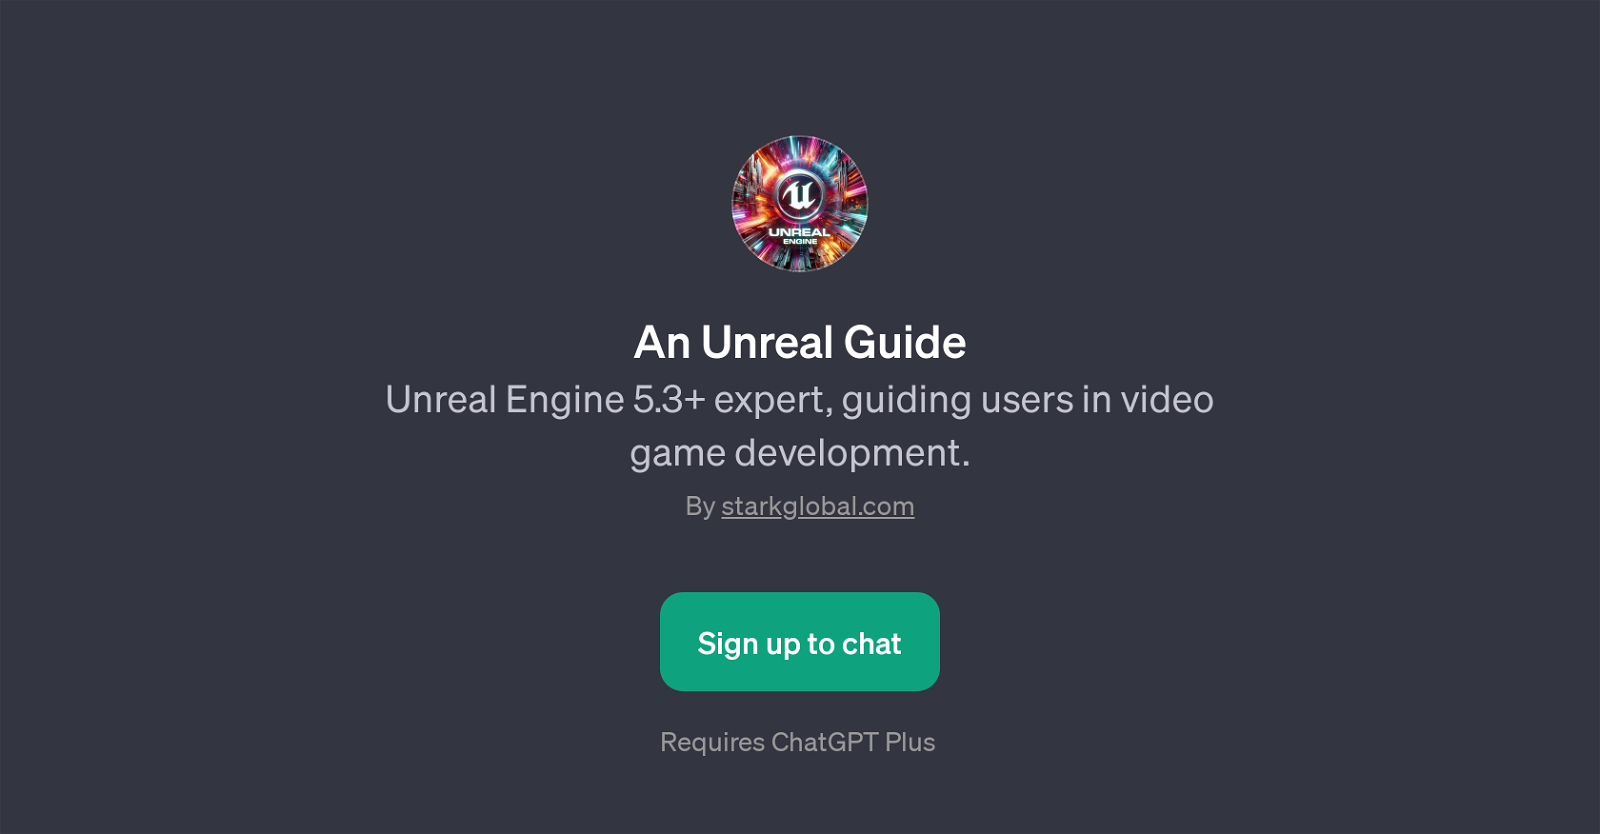 An Unreal Guide website